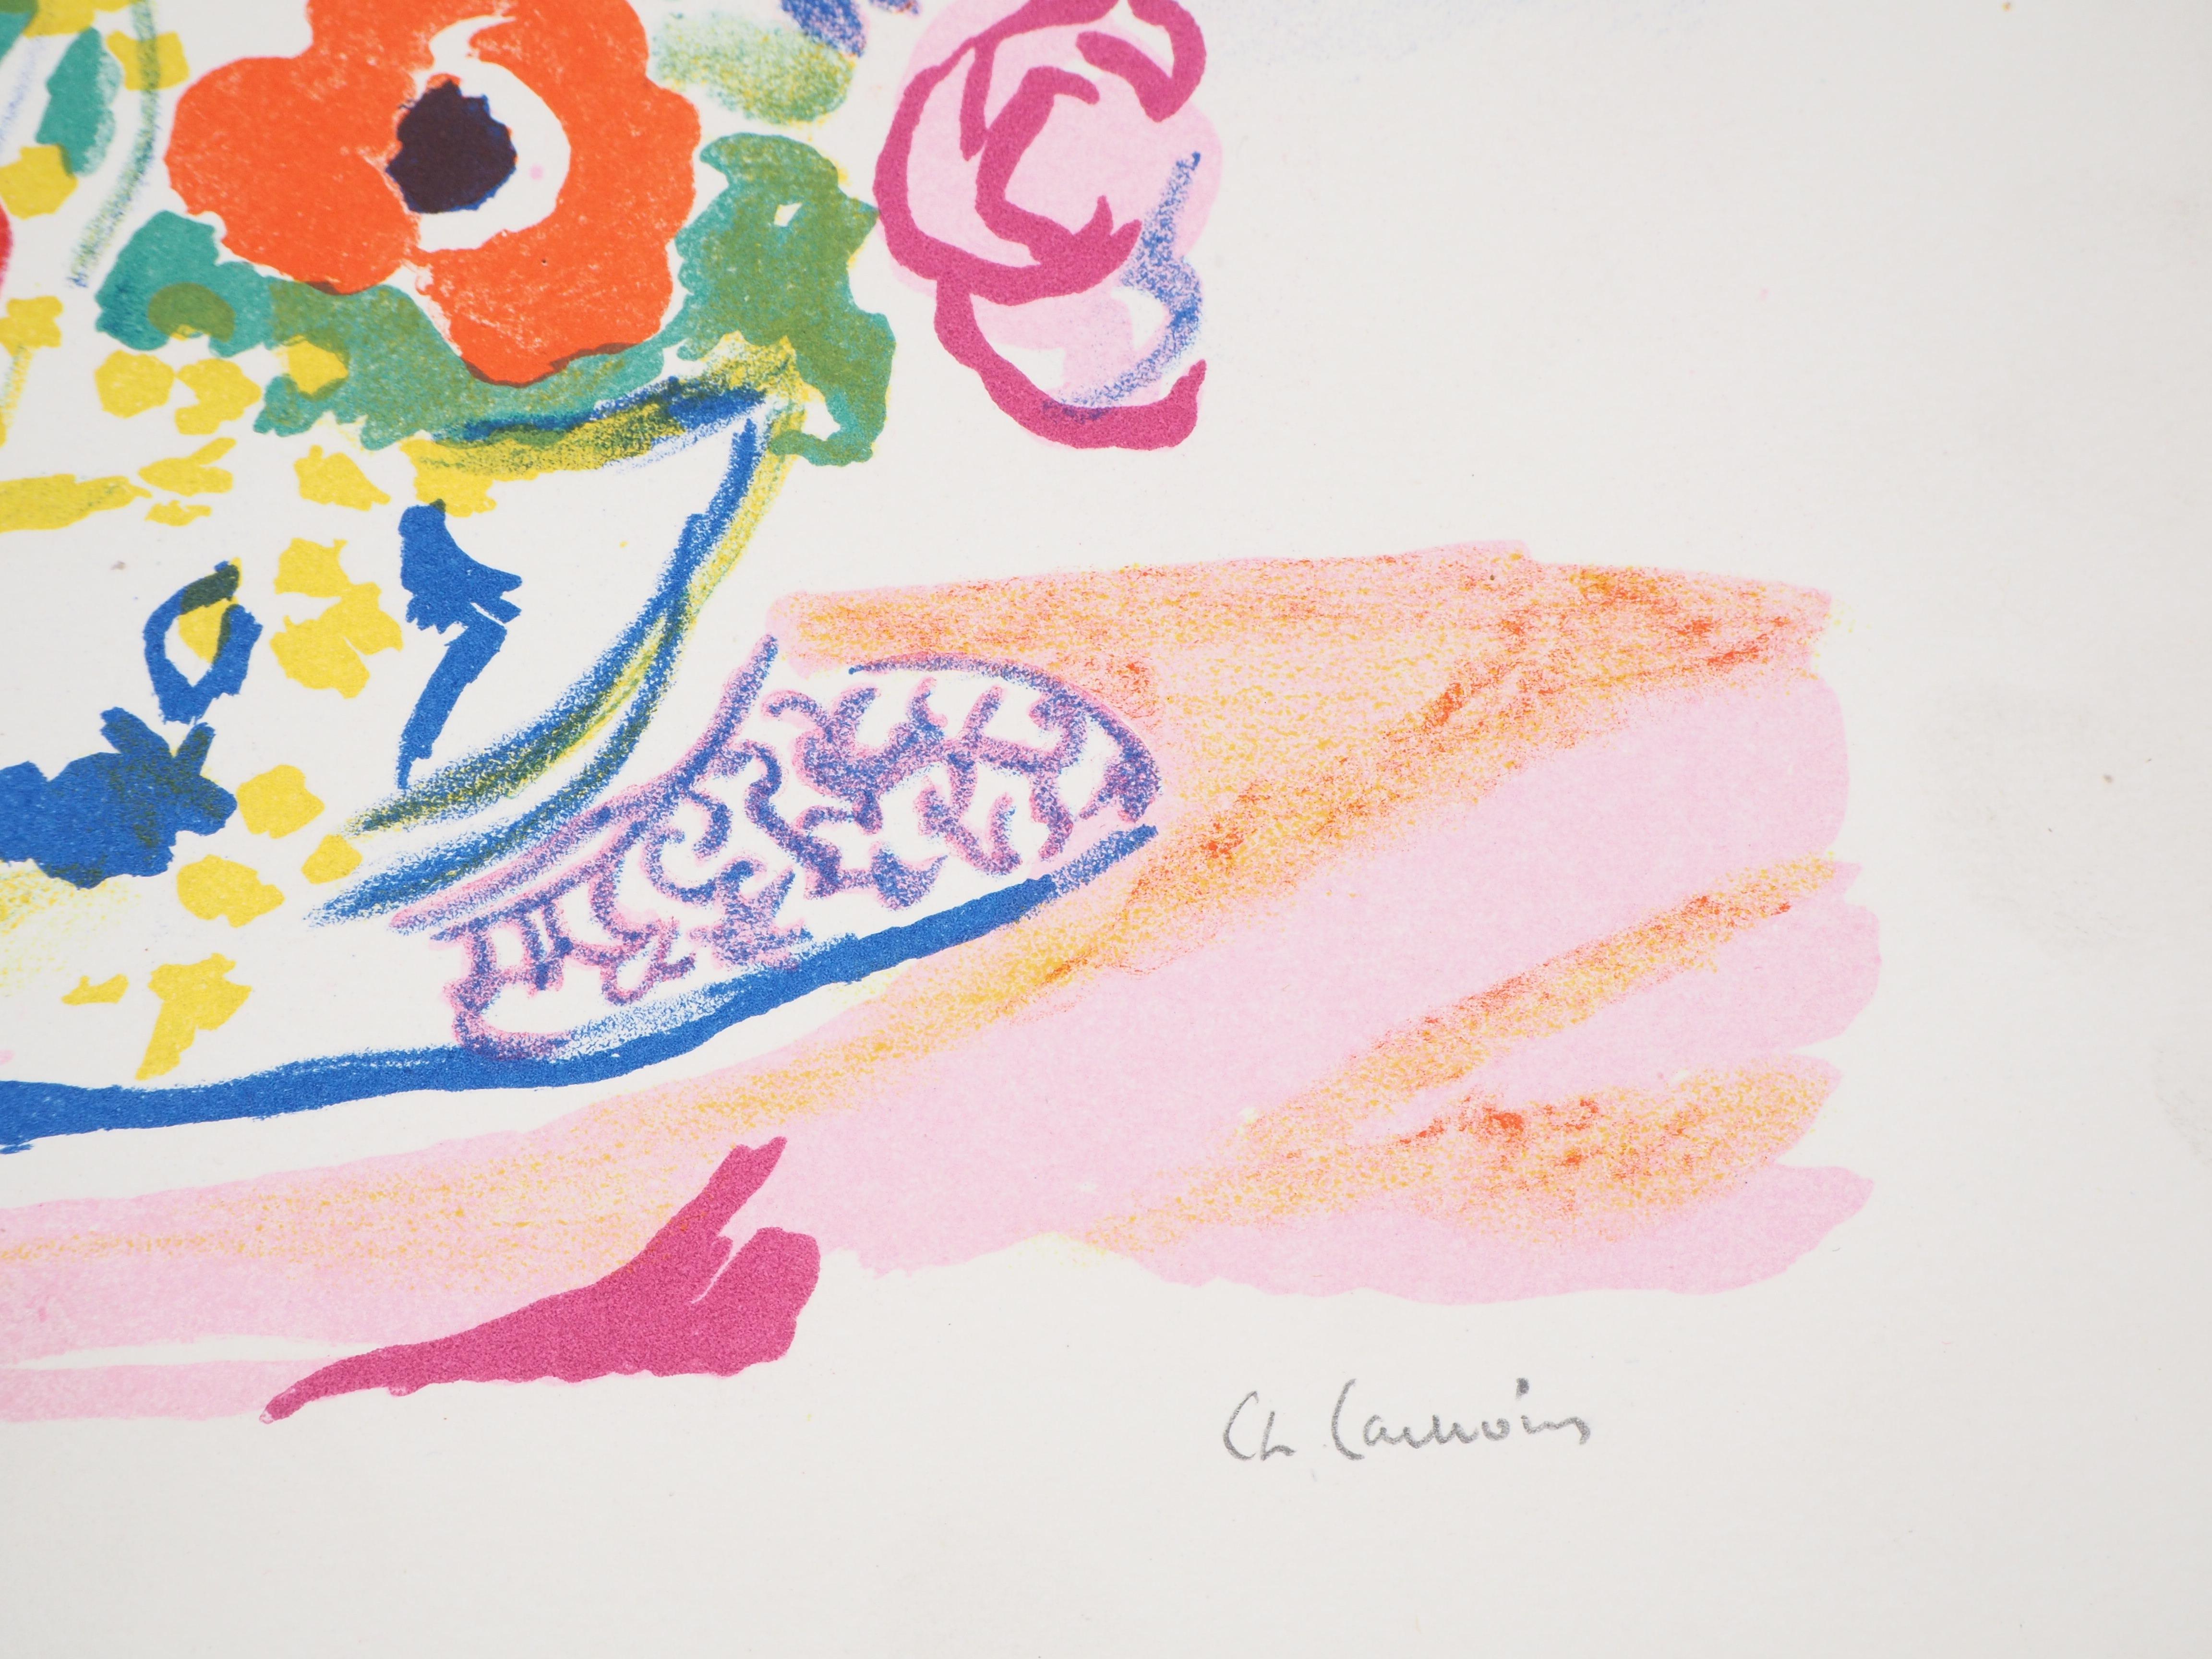 Colorful Bouquet - Original Lithograph - Signed - Print by Charles Camoin